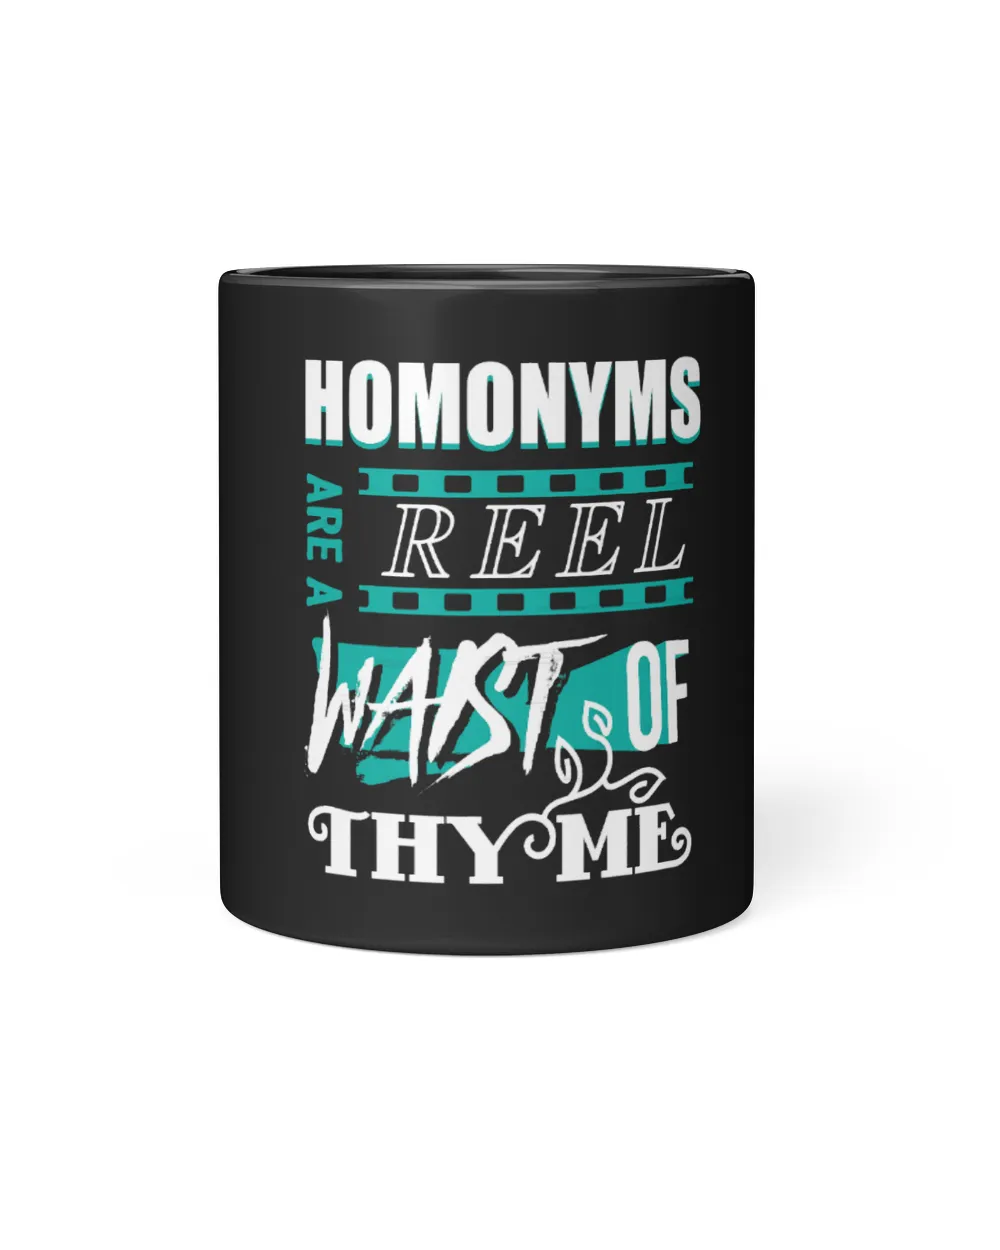 Homonymns Are a Reel Waist Of Thyme 2Funny Geek Nerd Shirts